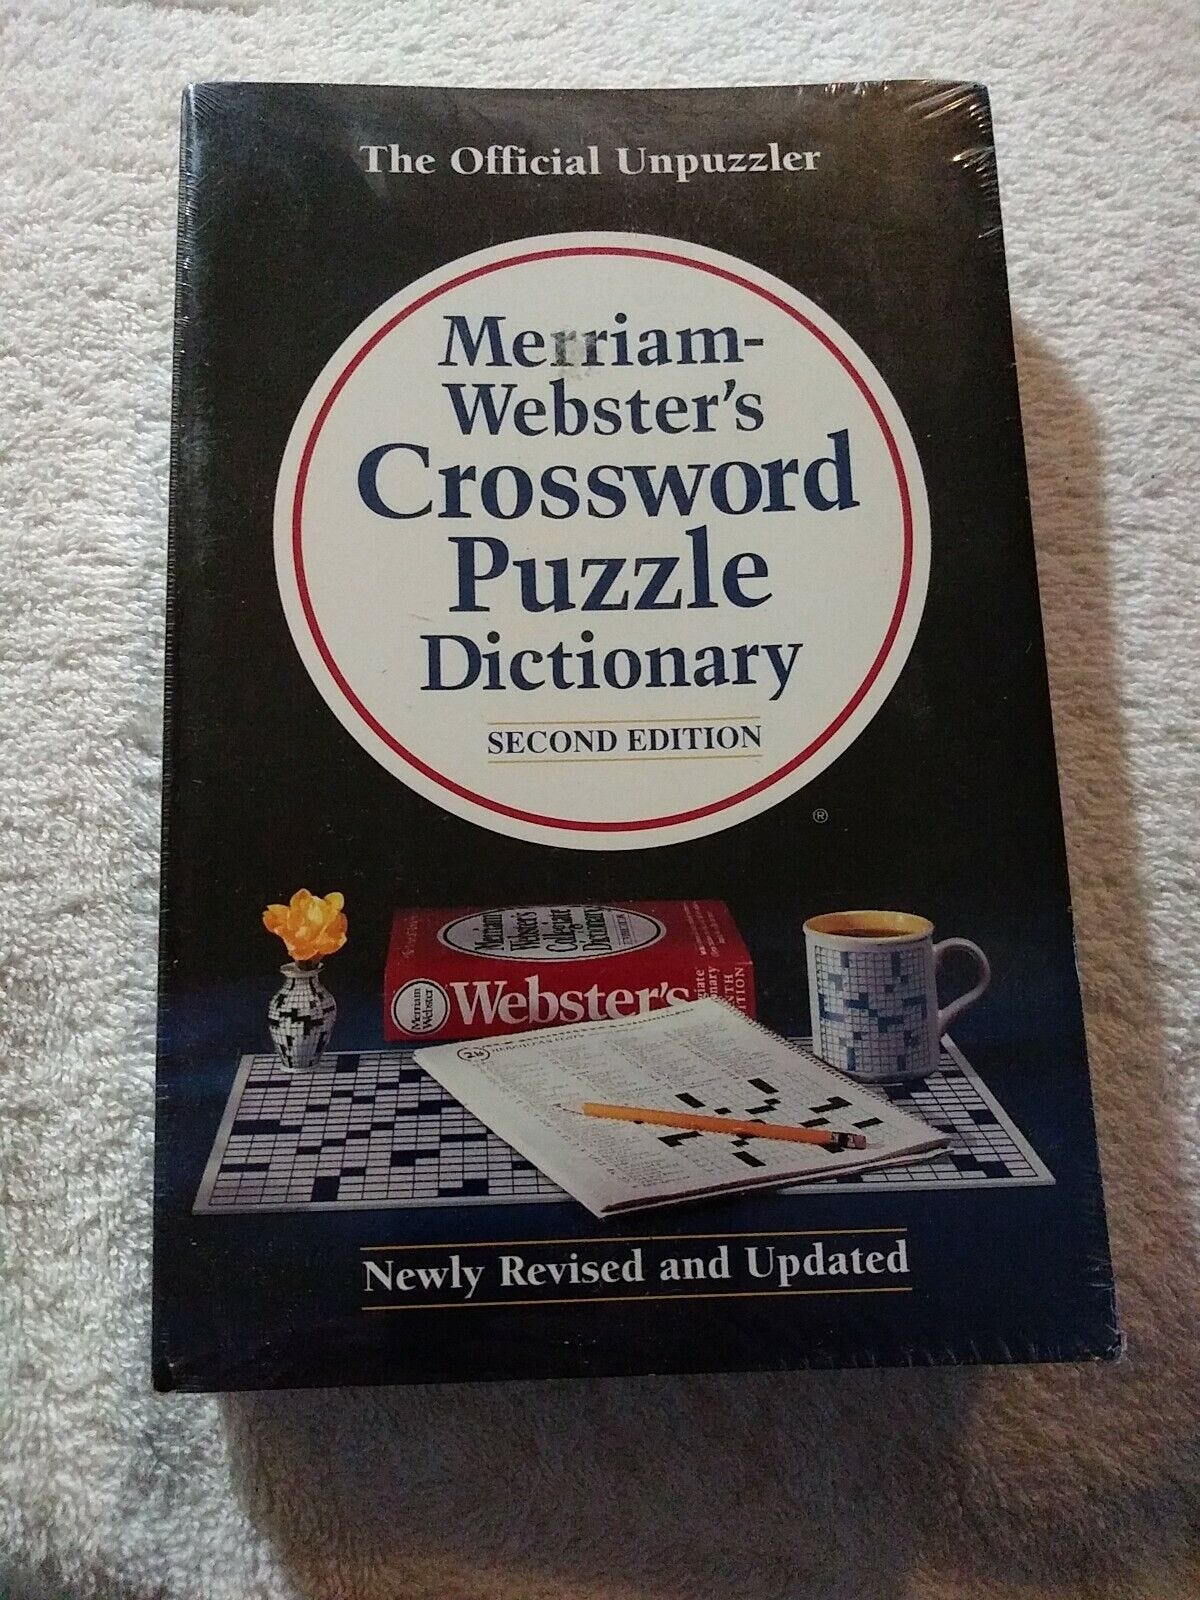 Merriam-Webster&#039;s Crossword Puzzle Dictionary, Second Edition  NEW-SEALED 9780877791218 | eBay